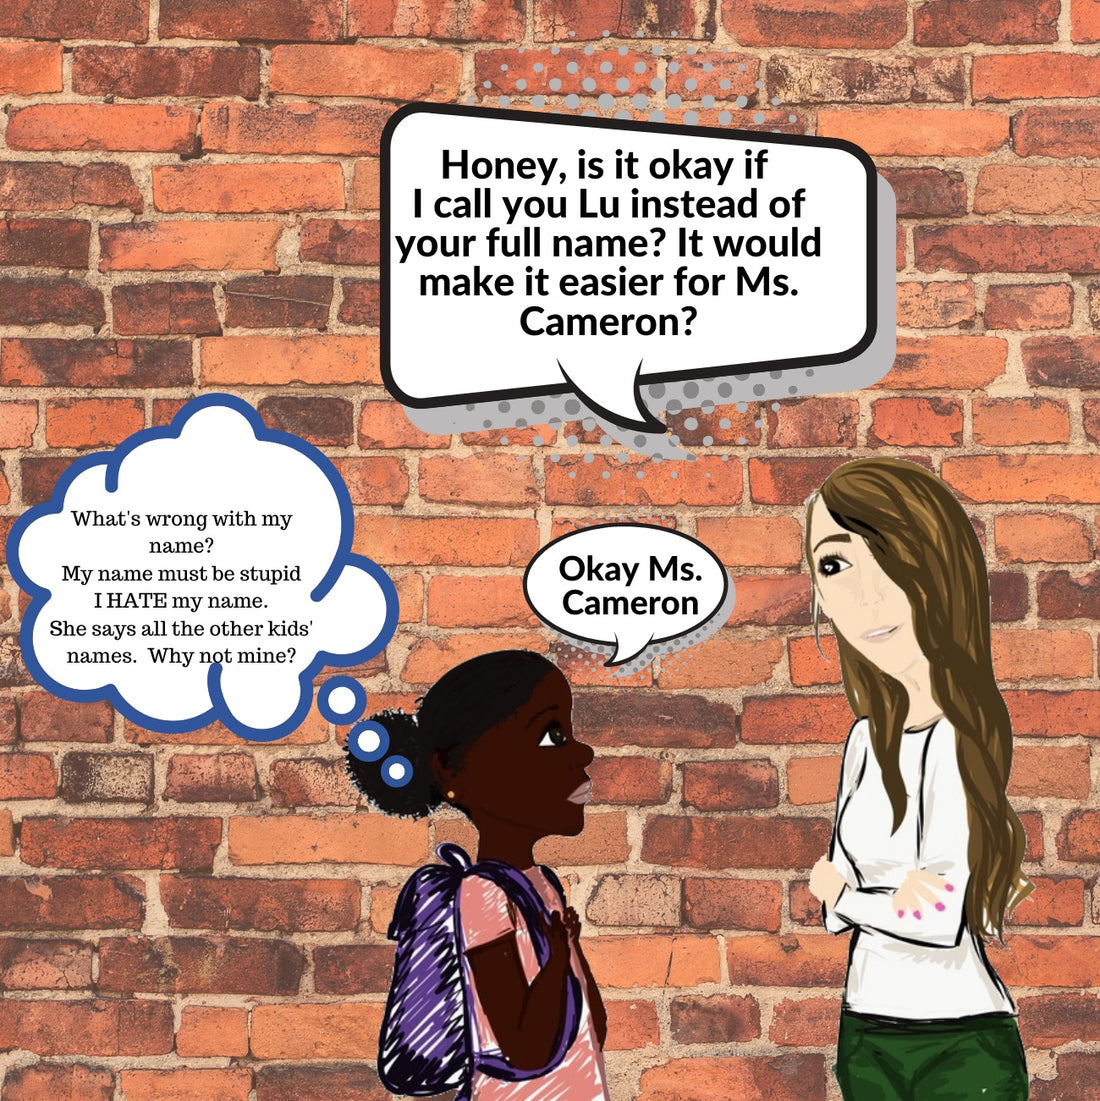 Micro aggression 1: A students name can be minimized to accommodate the educator